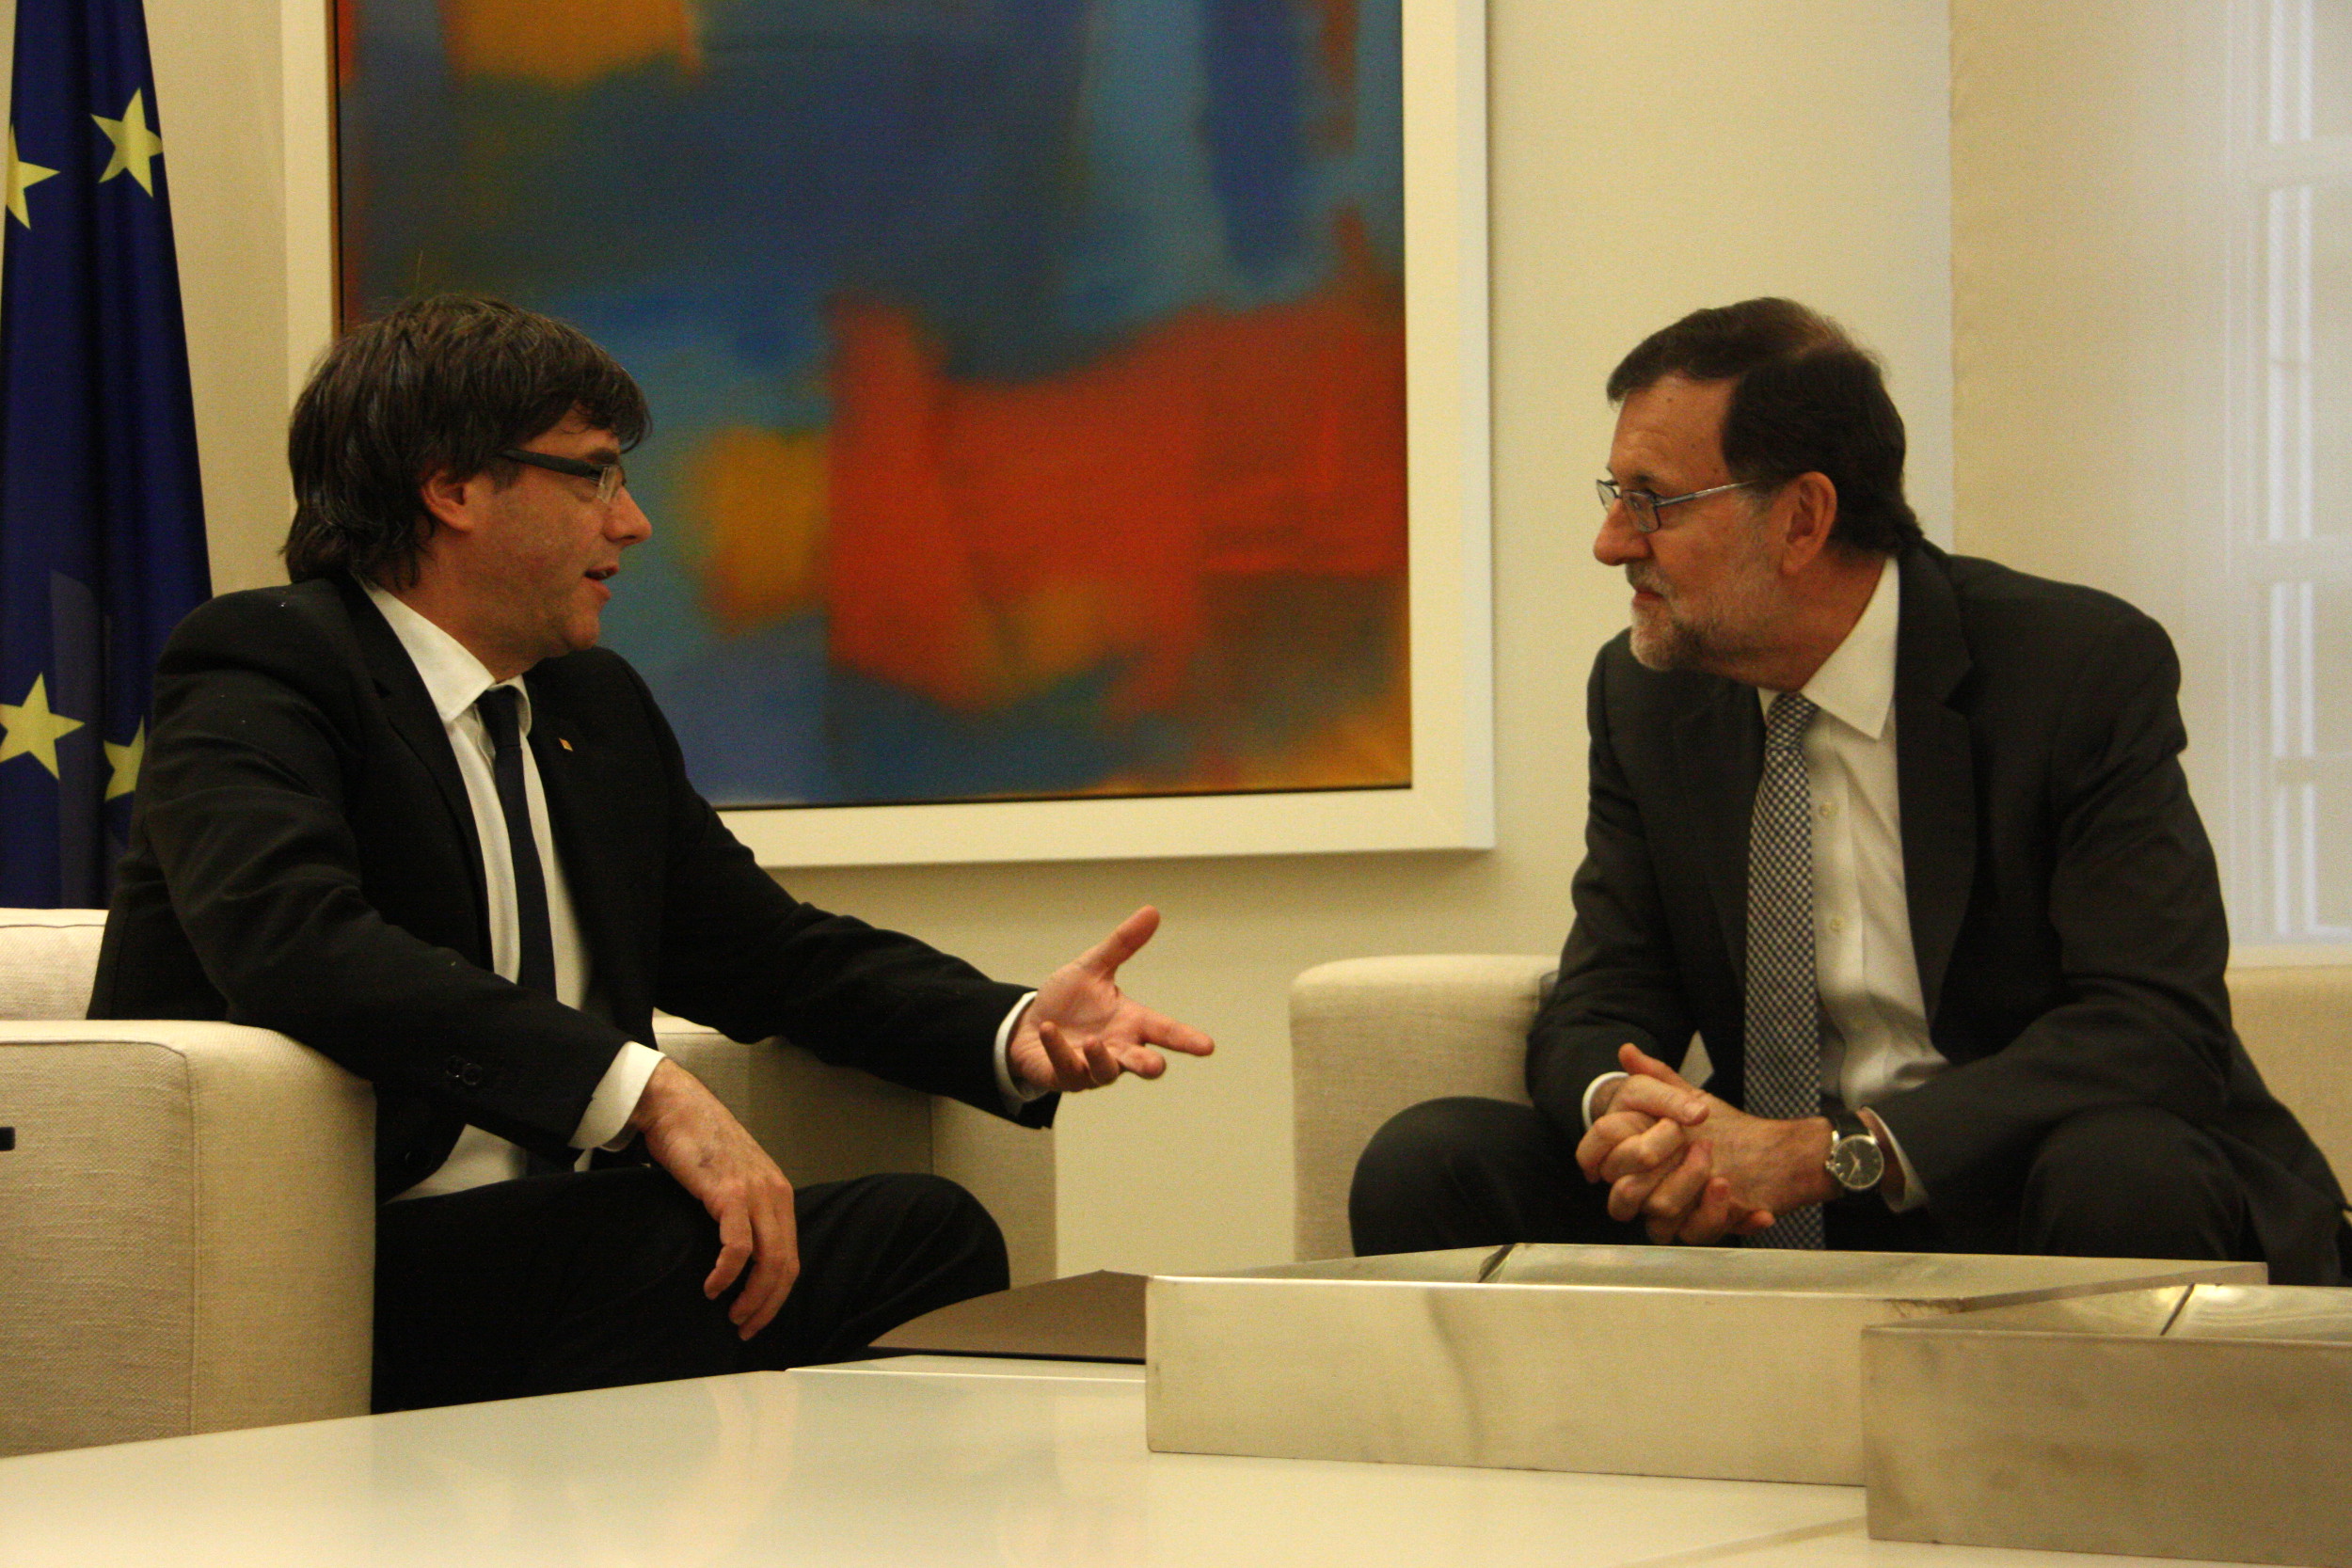 Catalan President, Carles Puigdemont during his first meeting with Current Spanish President, Mariano Rajoy (by ACN)